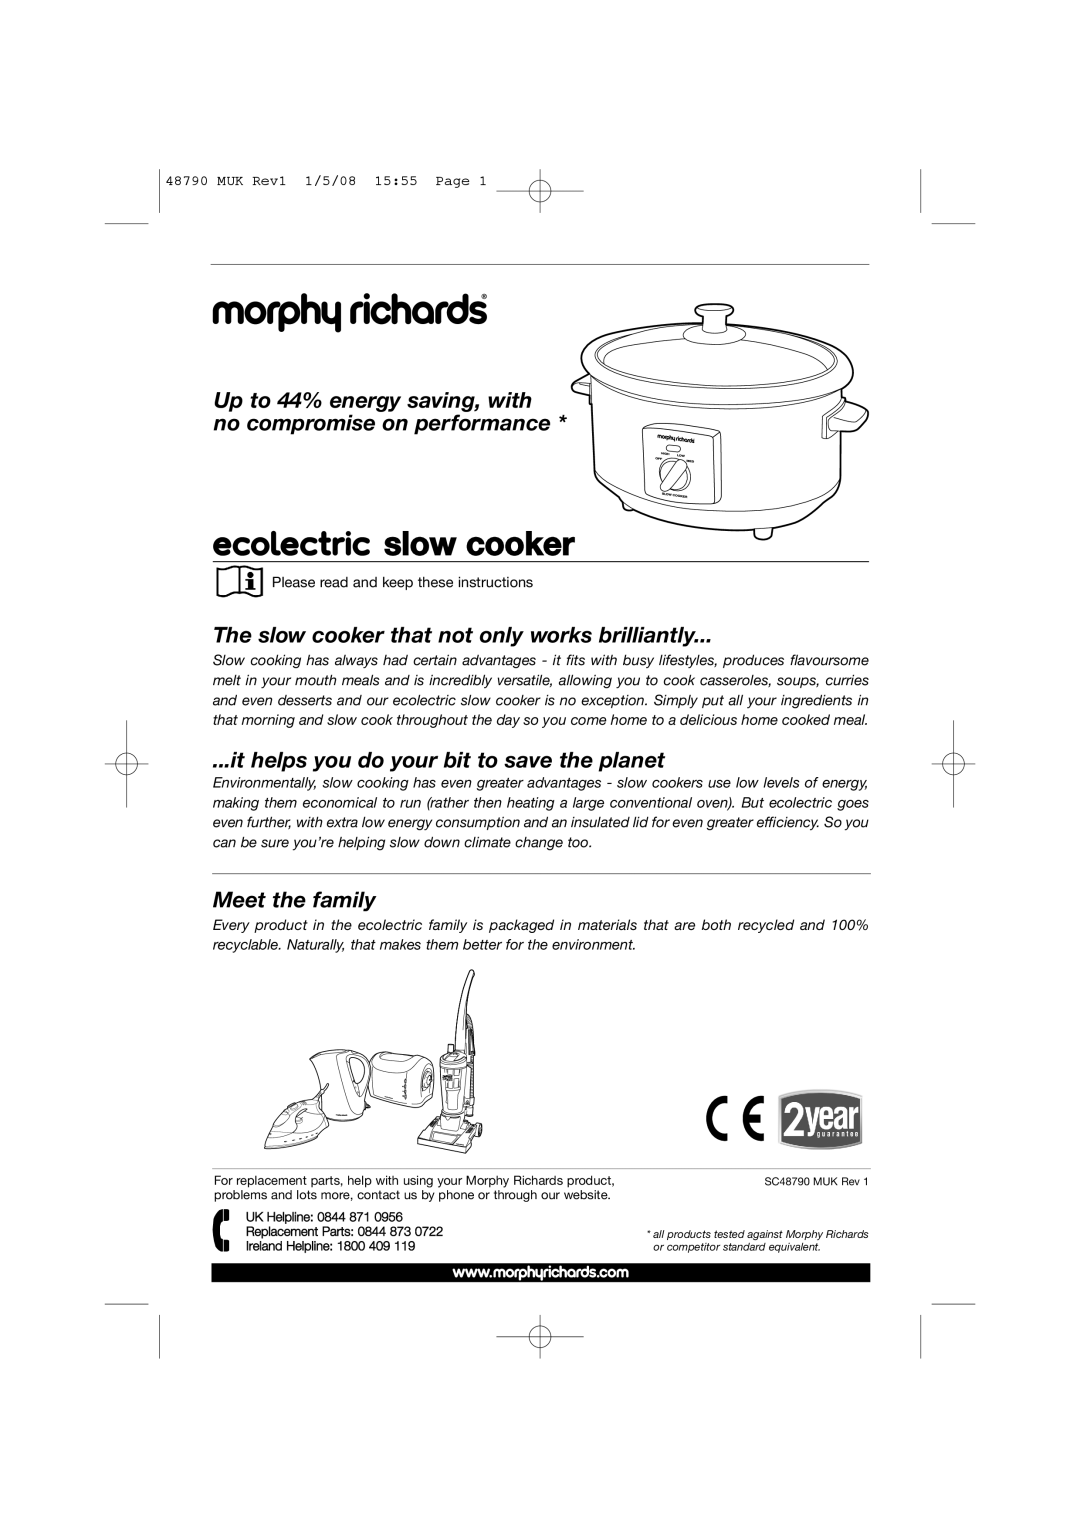 Morphy Richards 48790 manual slow cooker, Up to 44% energy saving, with no compromise on performance, Meet the family 